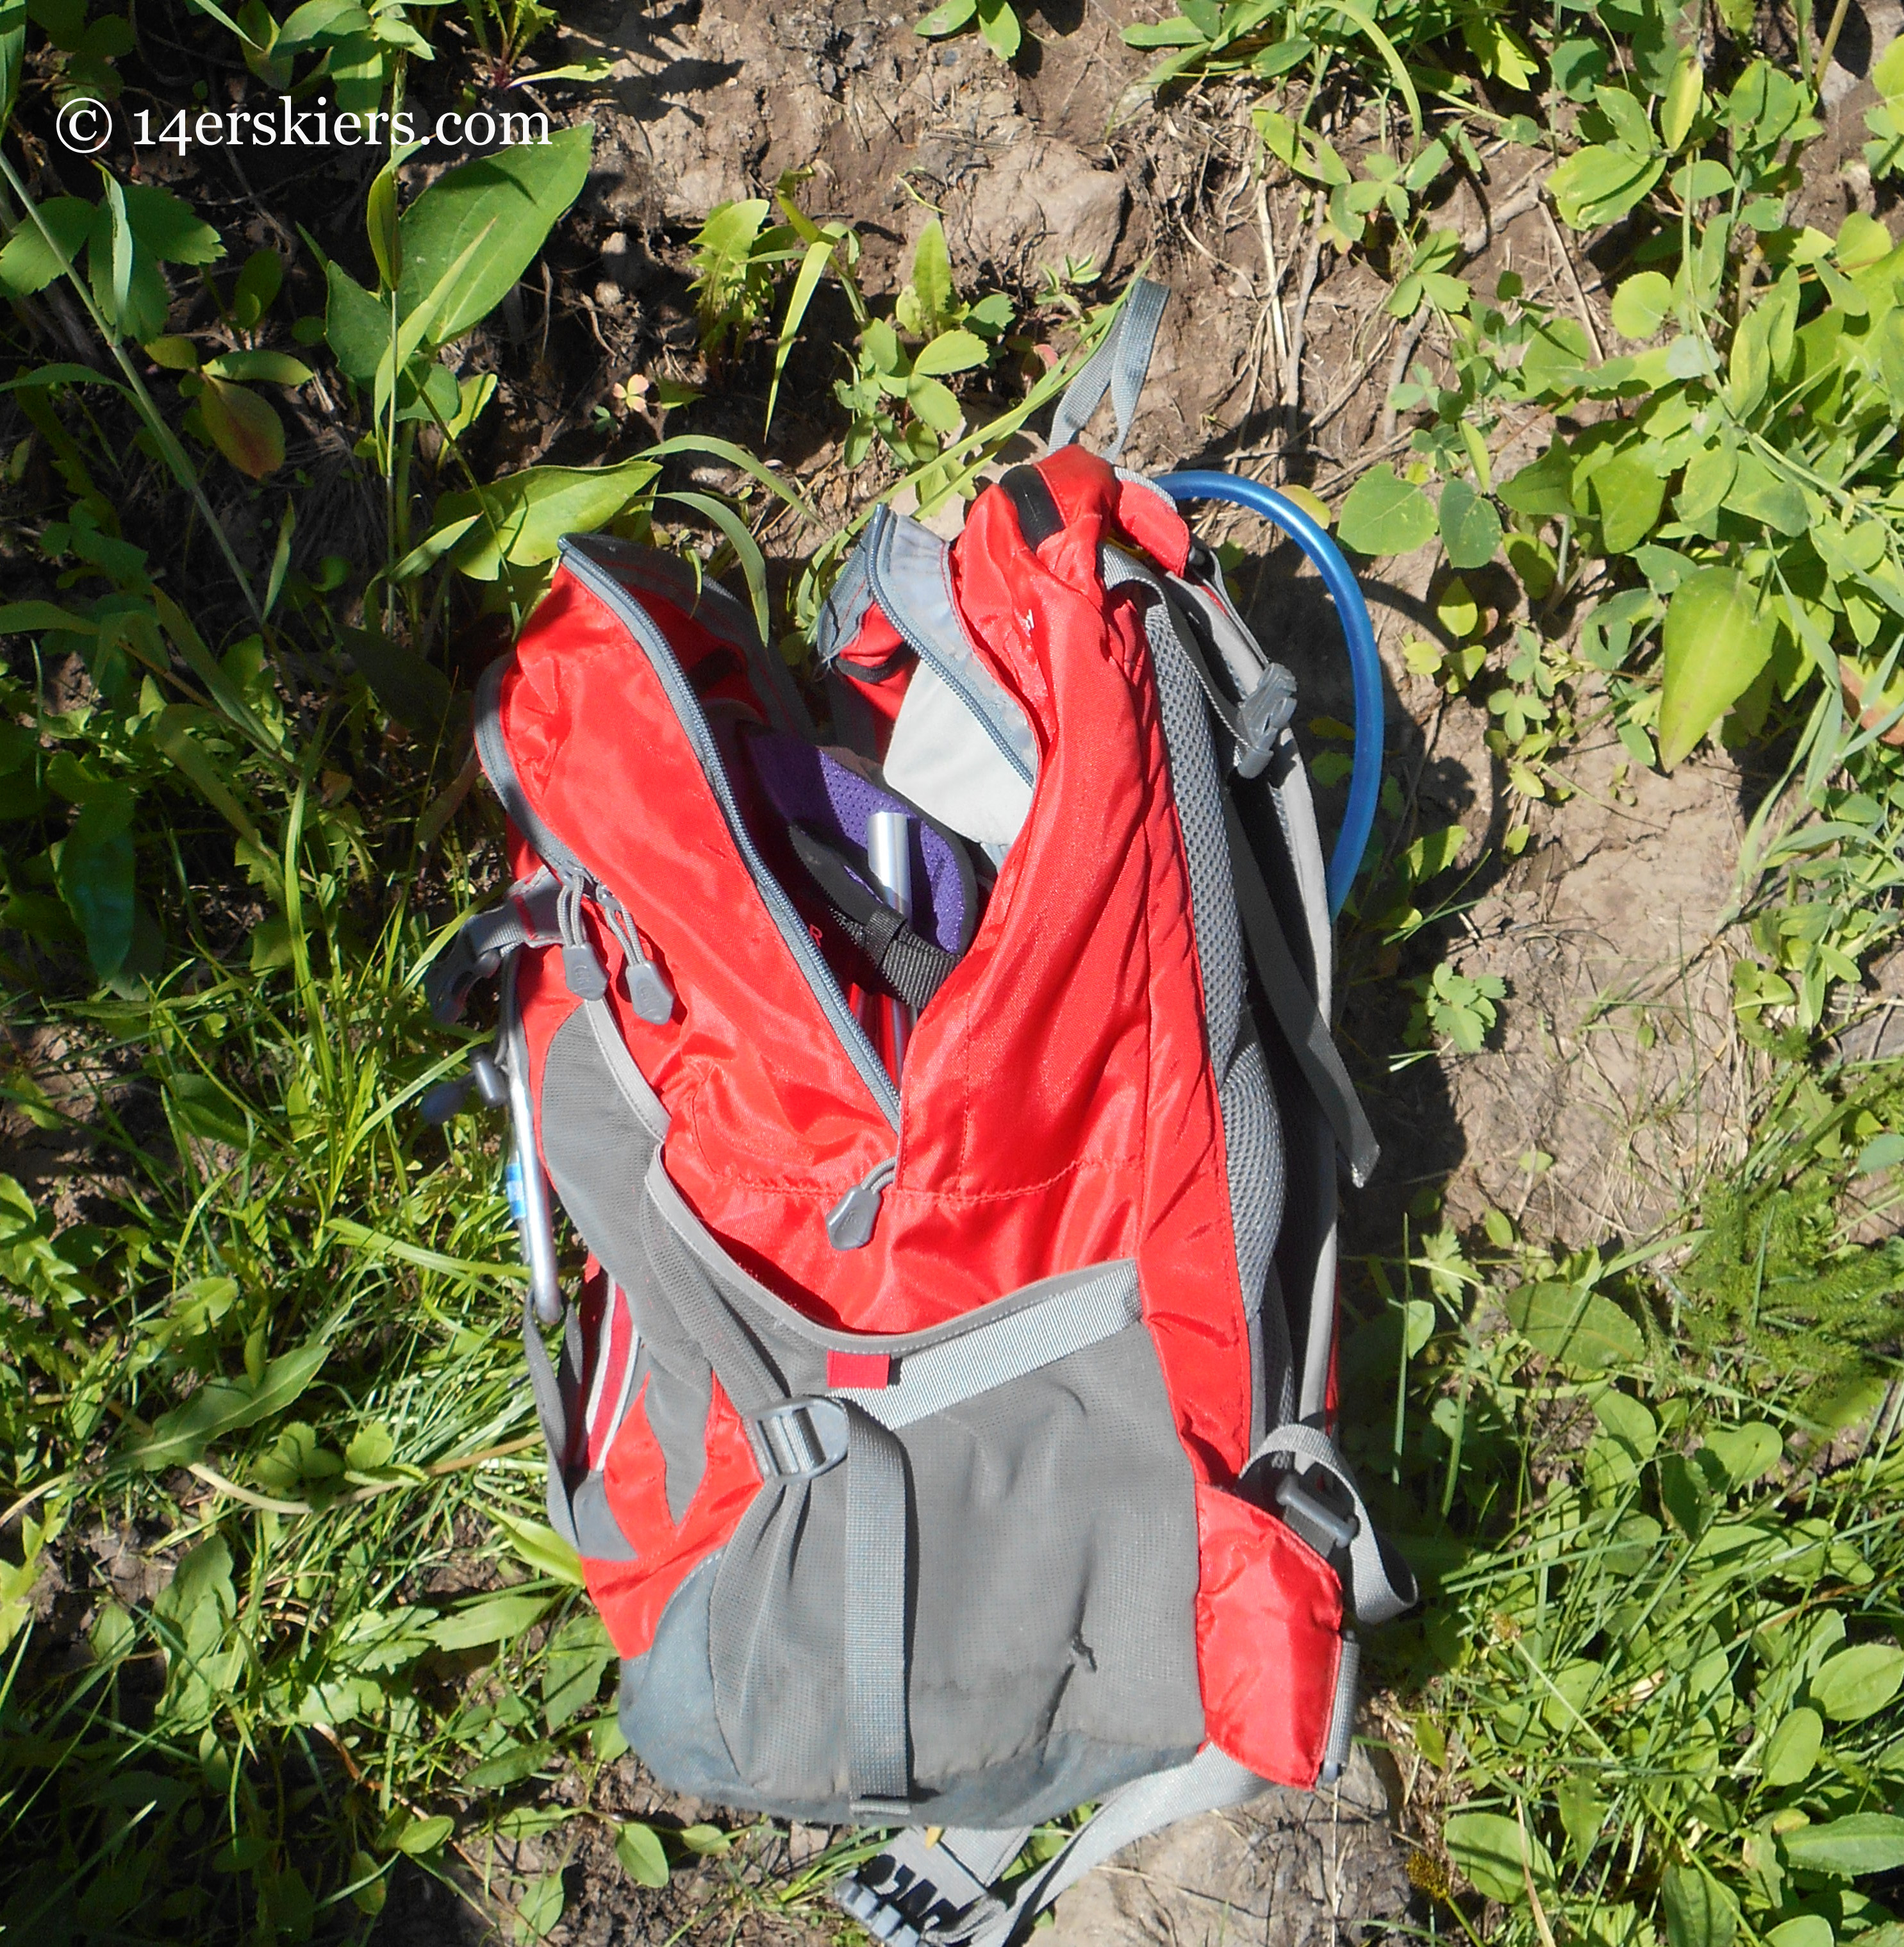 The z-pole technology allows my Ultra Mountain Trekking pole to fit into my day pack!